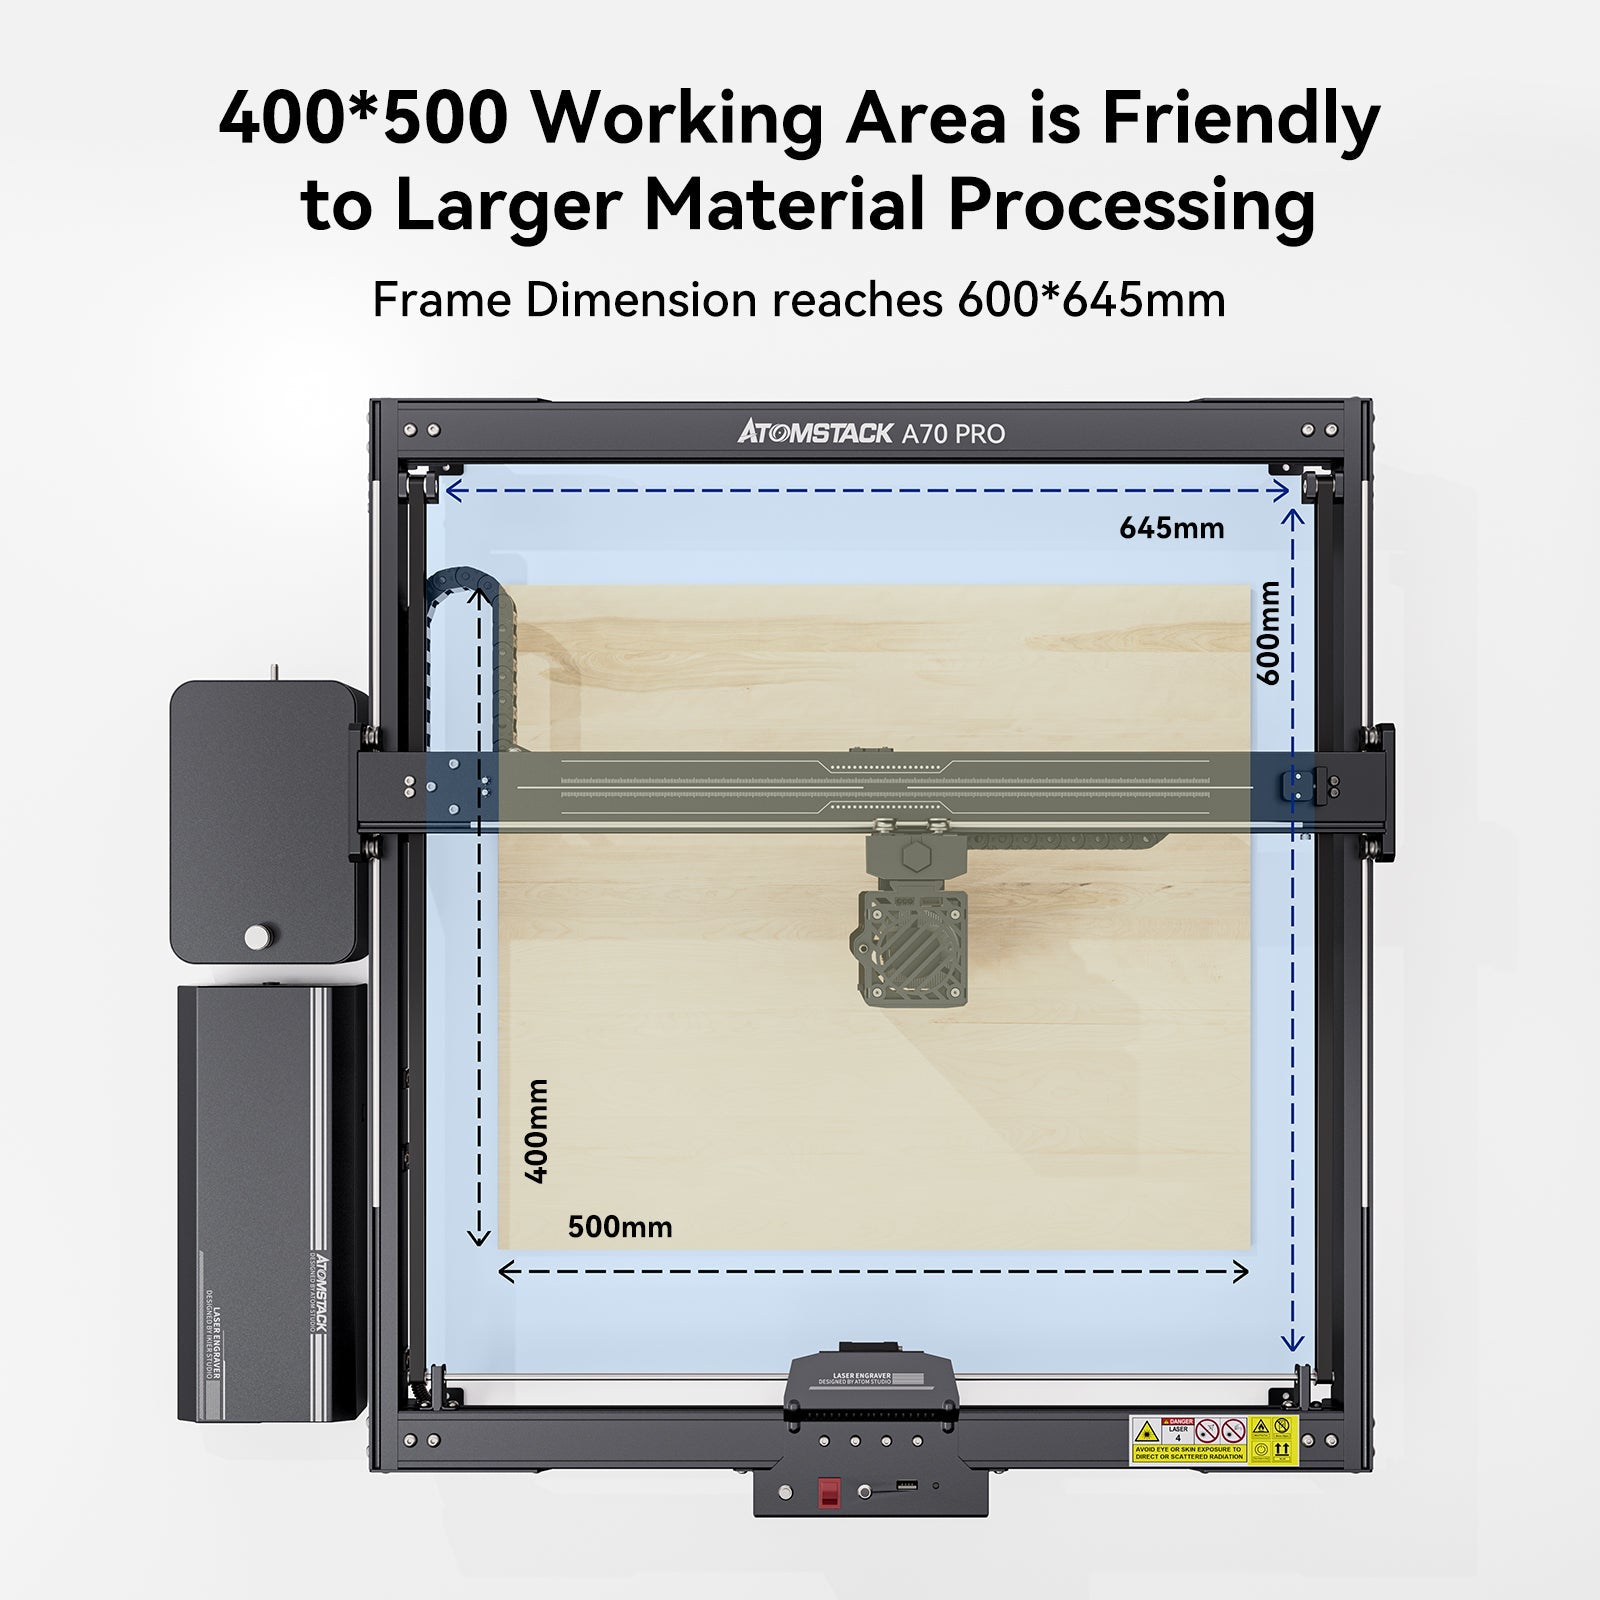 ATOMSTACK A70 X70 Pro Laser Engraver 77W COS Blue Light Laser Power with F60 Air Assist Set 24000mm/min Auto Focus with 4.3 inches Control Monitor 500x400mm Work Area